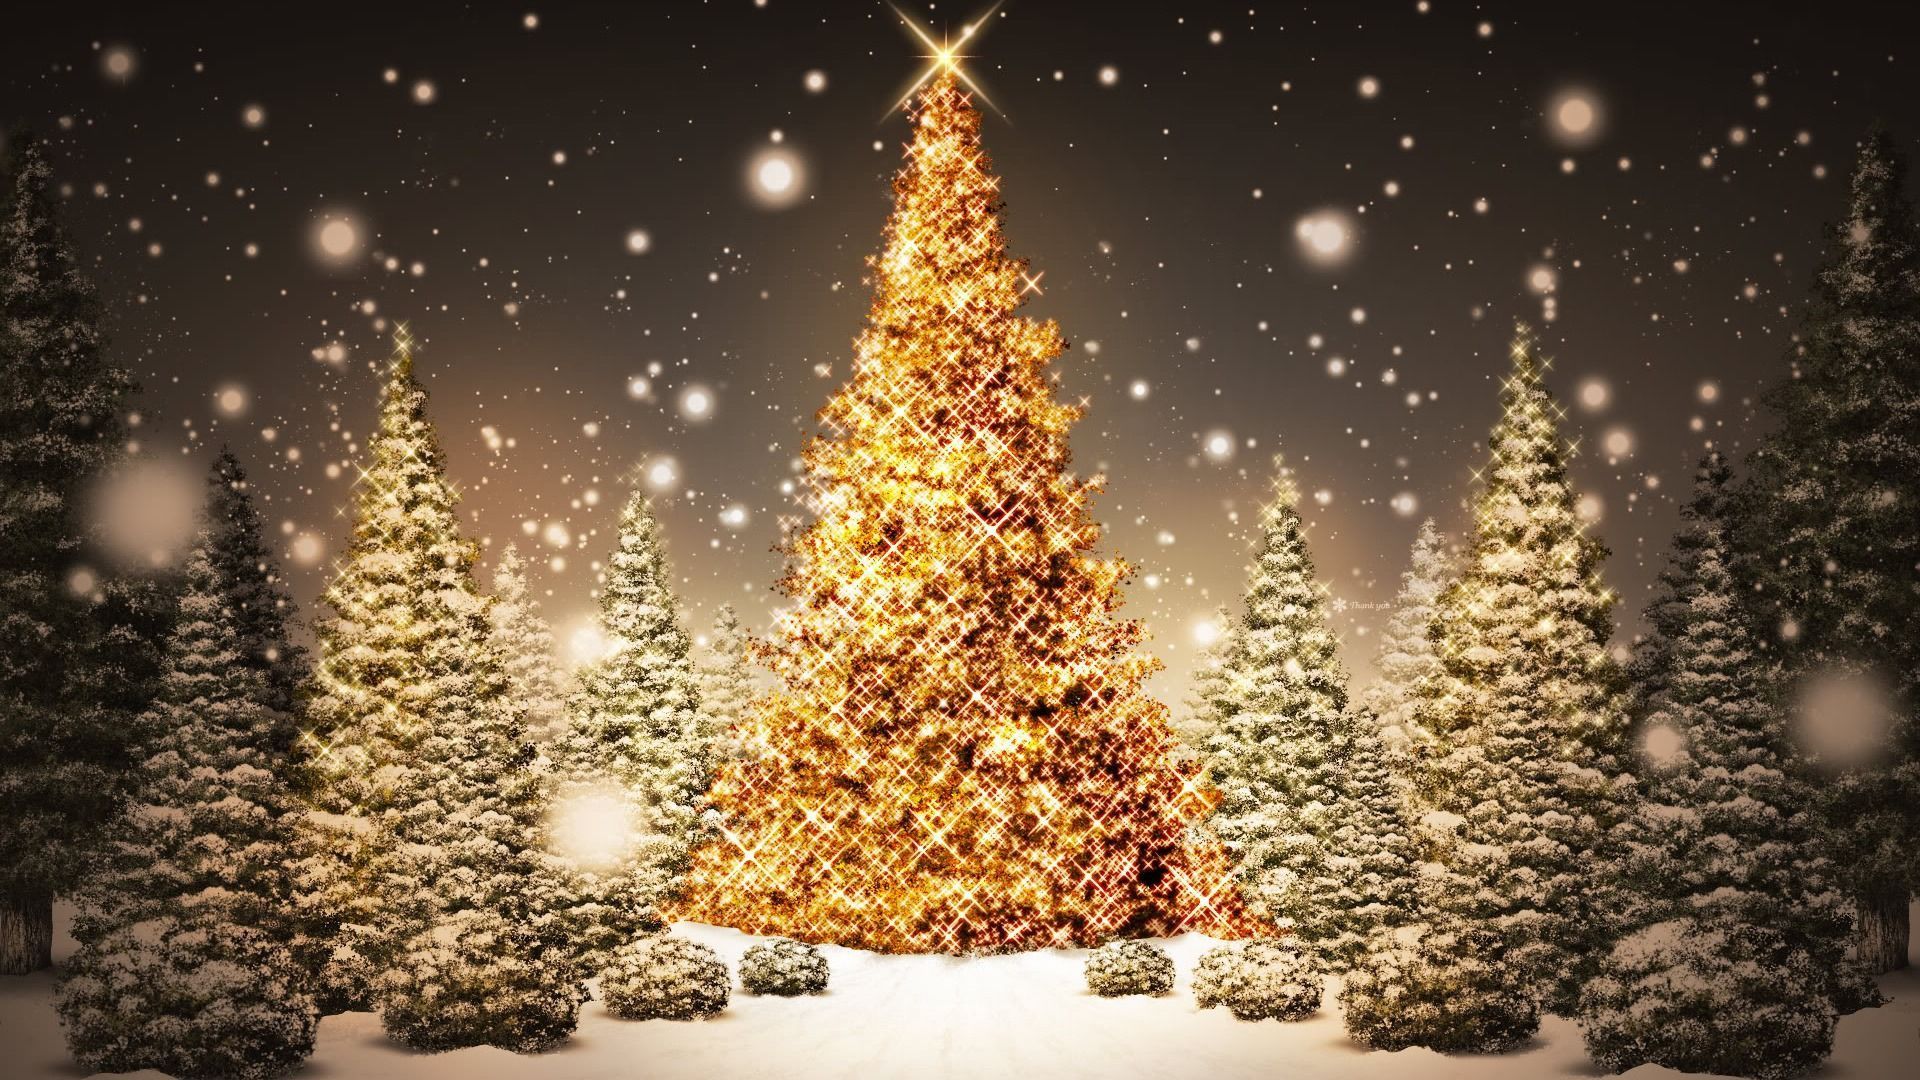 202 Christmas Lights HD Wallpapers | Backgrounds - Wallpaper Abyss